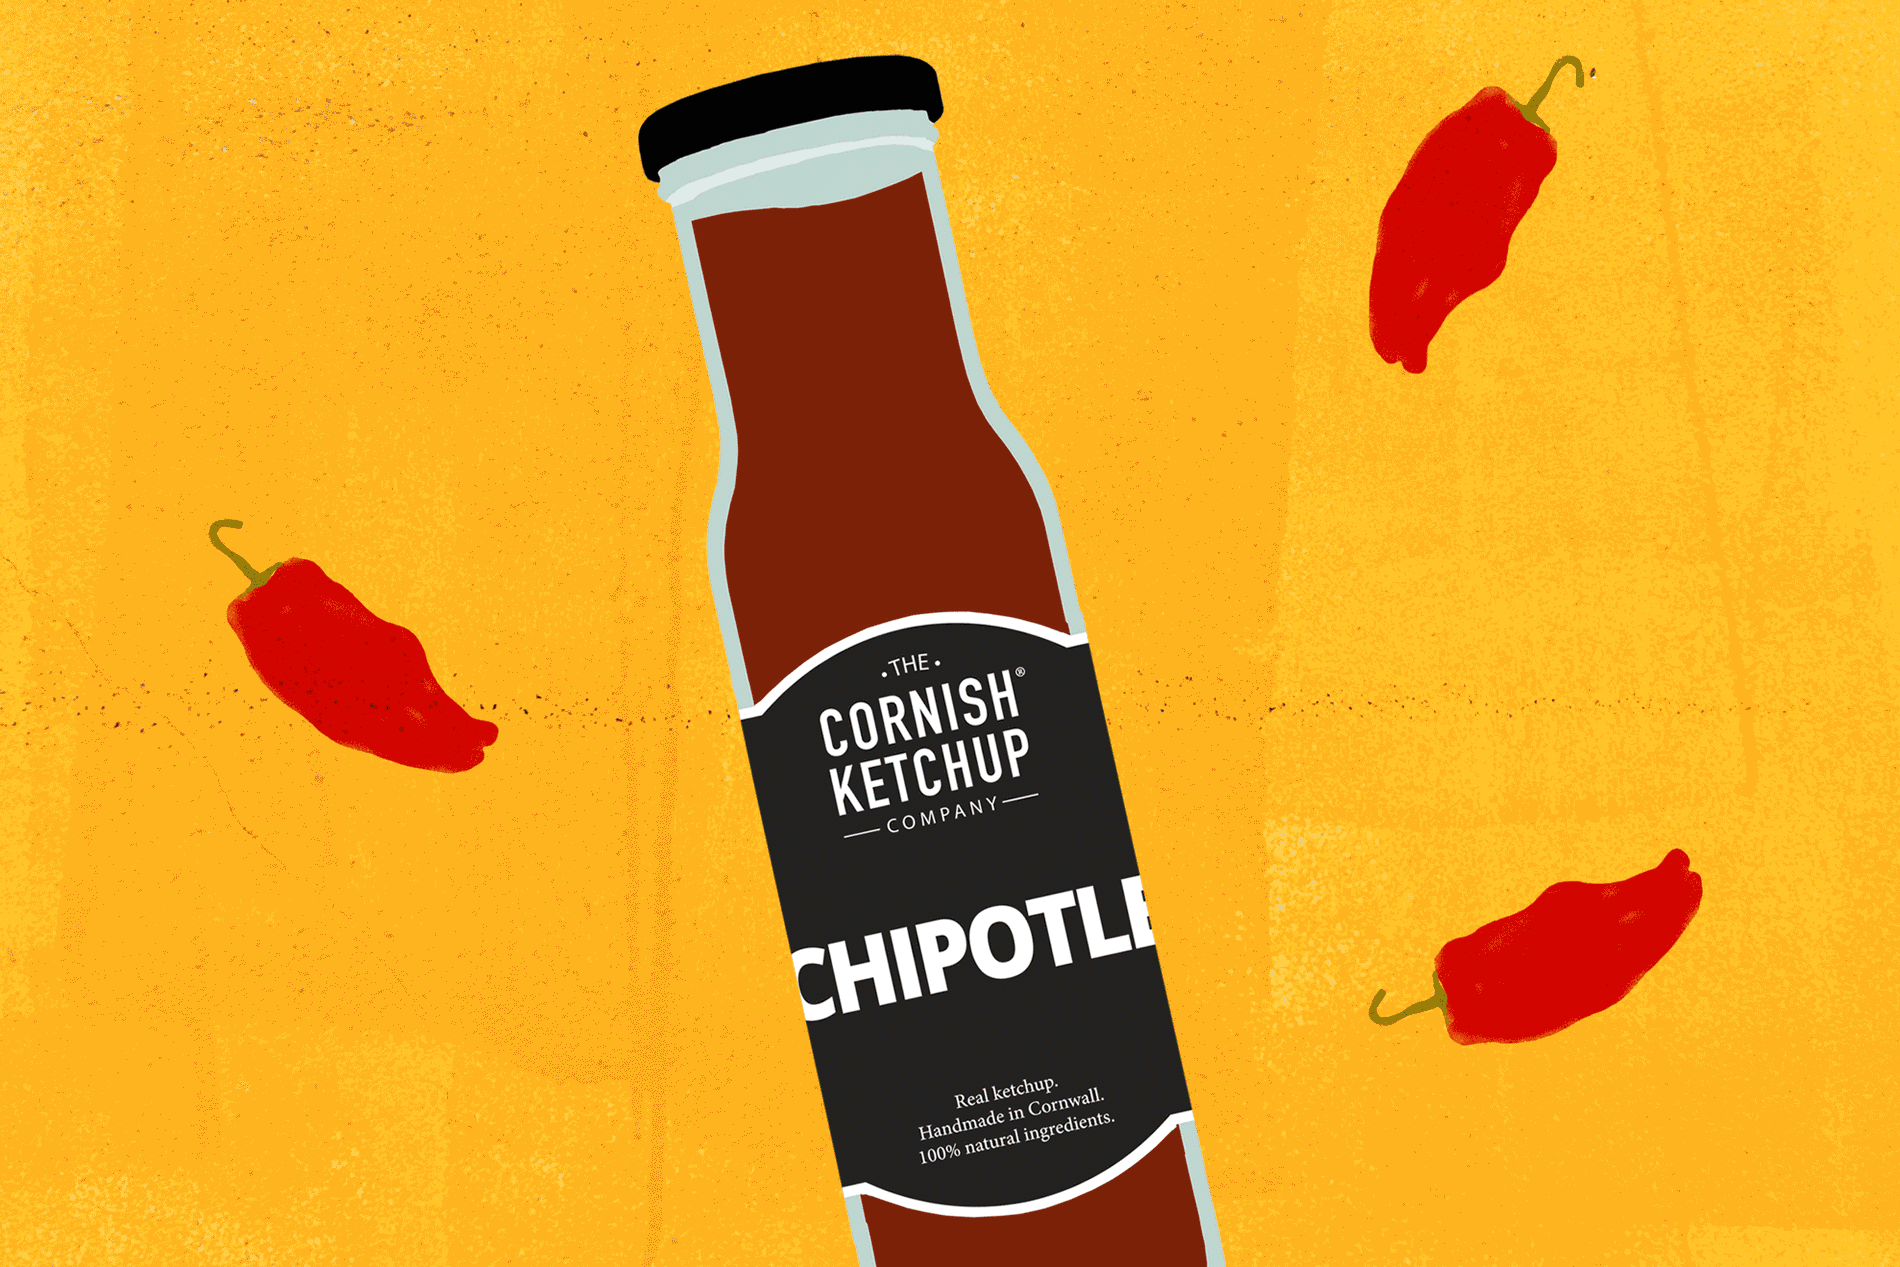 illustrations of bottles of chipotle, red pepper and smokey ketchup on brightly coloured backgrounds